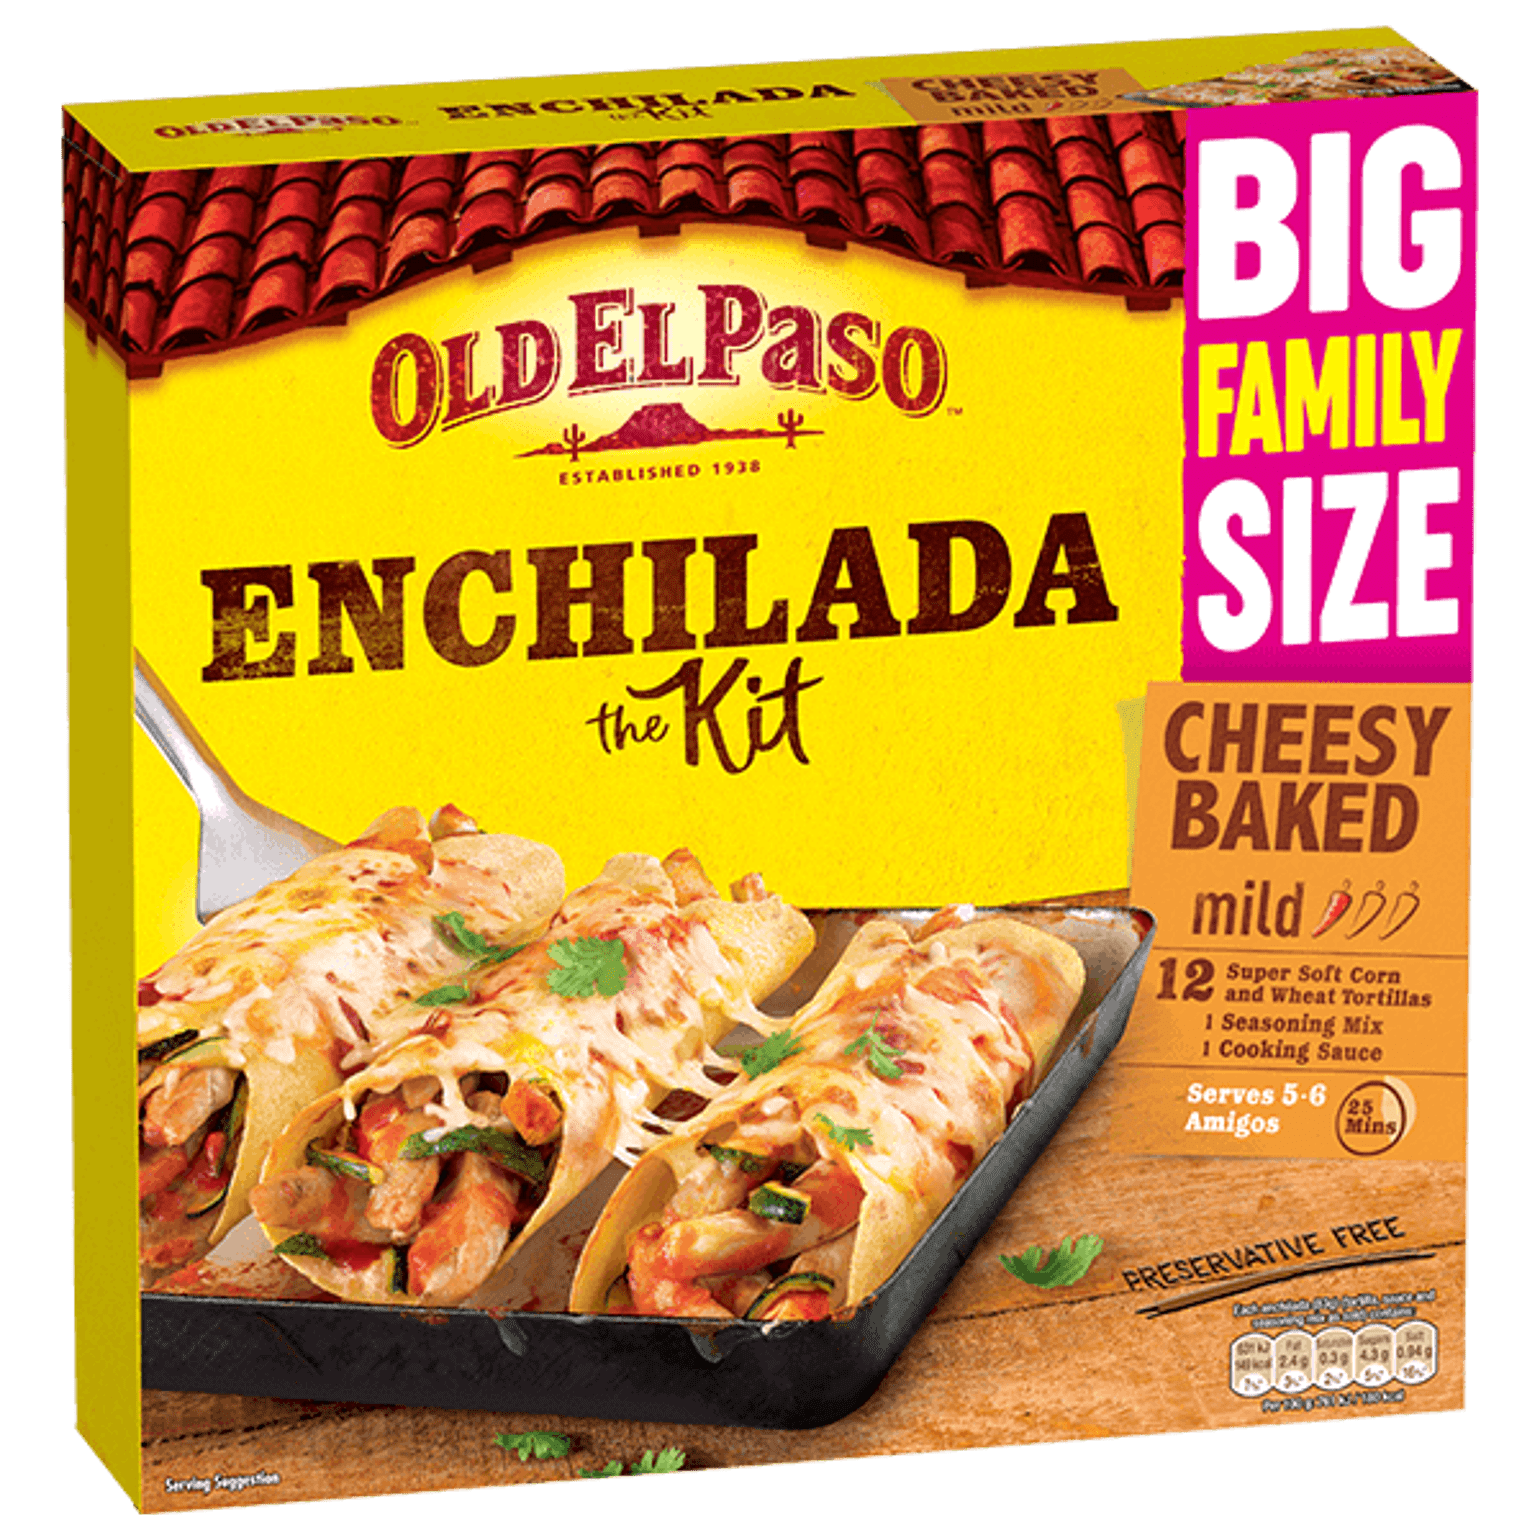 pack of Old El Paso's big family size mild cheesy baked enchilada kit containing 12 soft corn & wheat tortillas, seasoning mix & cooking sauce (995g)